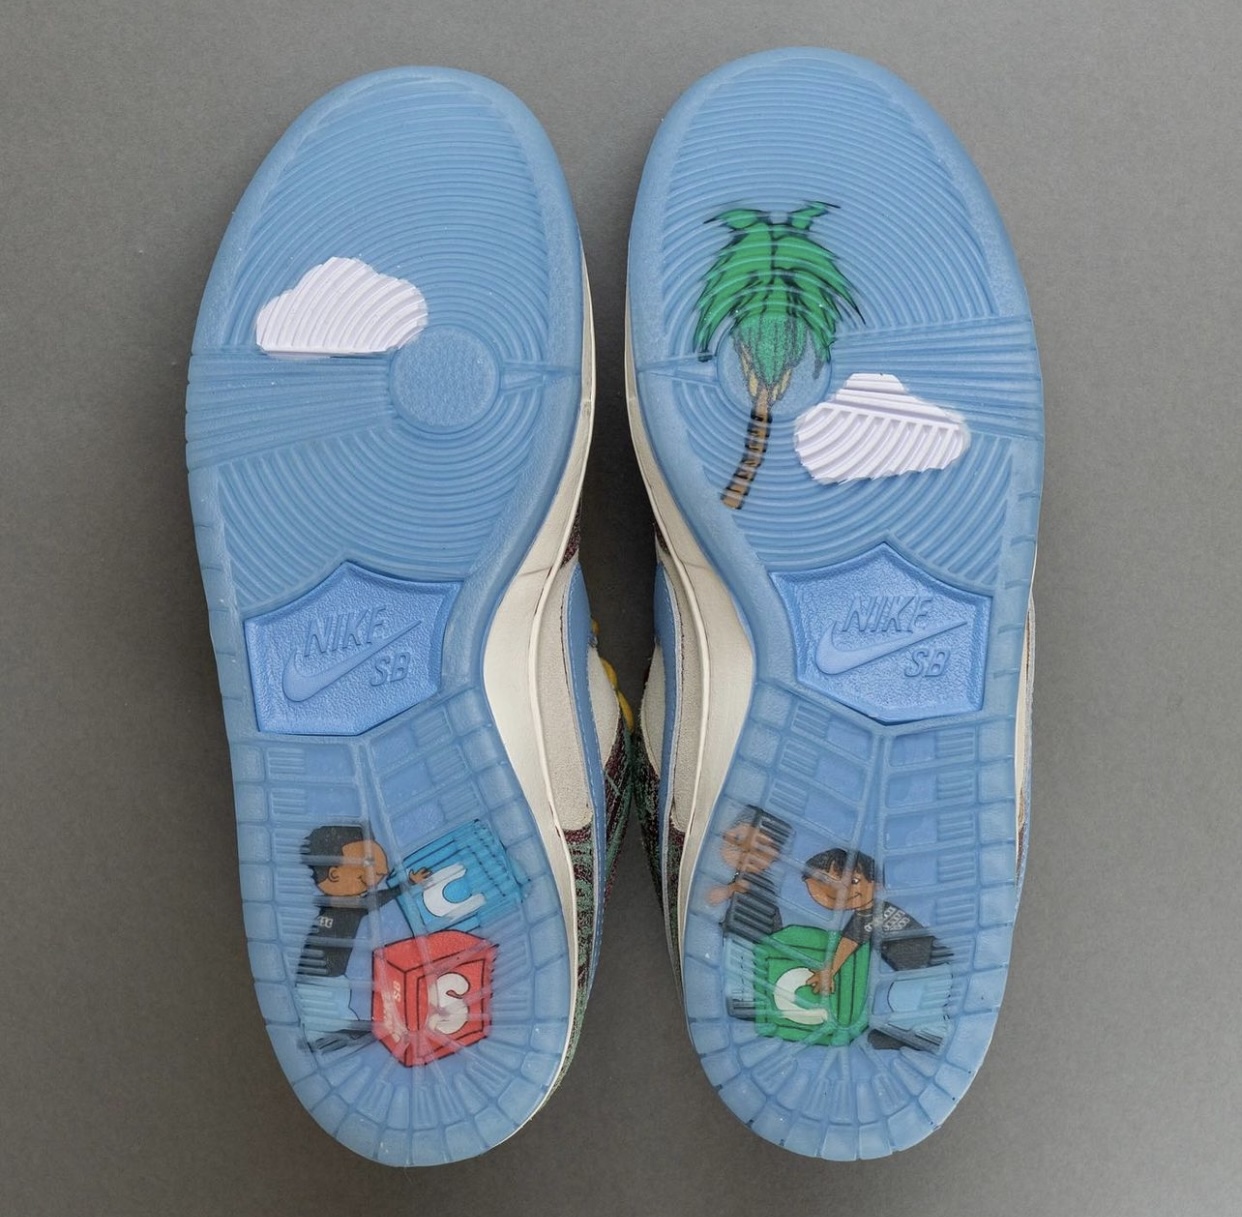 lebron x for sale nike factory clearance toddler boys nike slides sneakers shoes FN4193-100 On-Feet